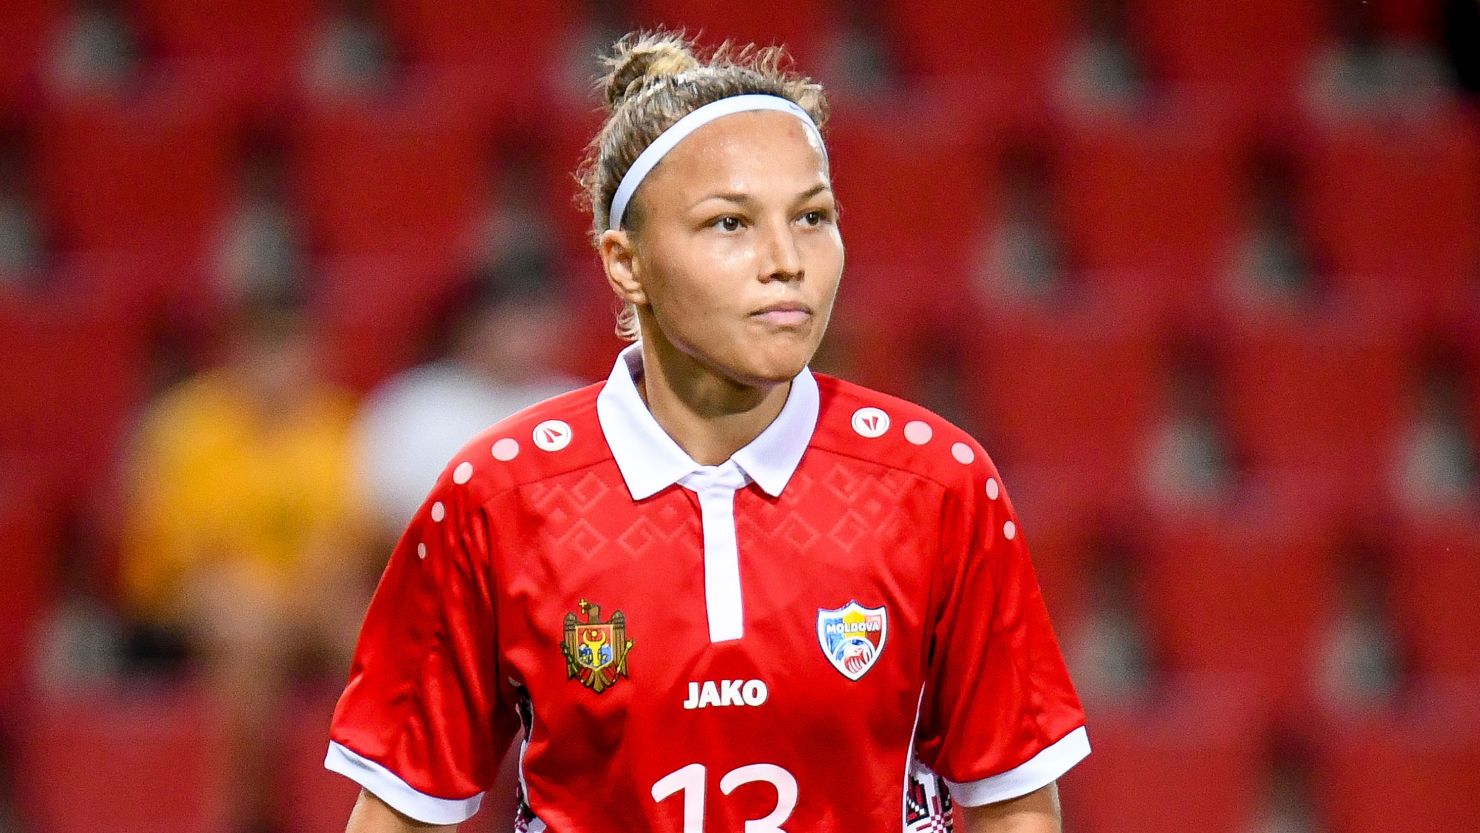 Violeta Mitul played during the Women's World Cup 2023 qualifiers.